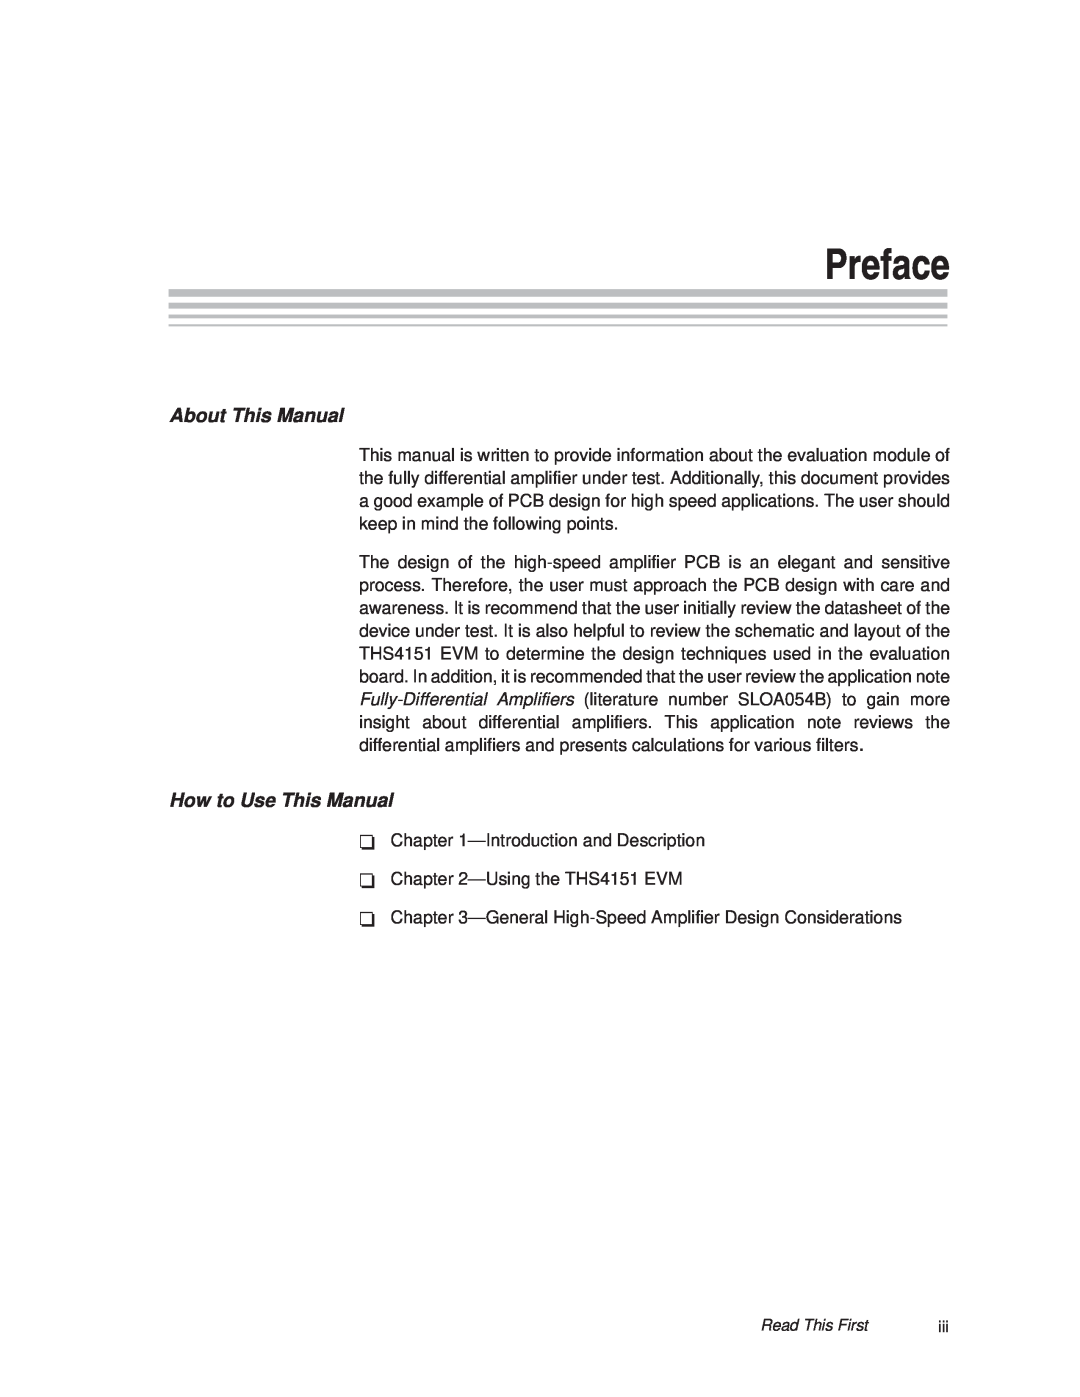 Texas Instruments THS4151 manual Preface, About This Manual, How to Use This Manual 